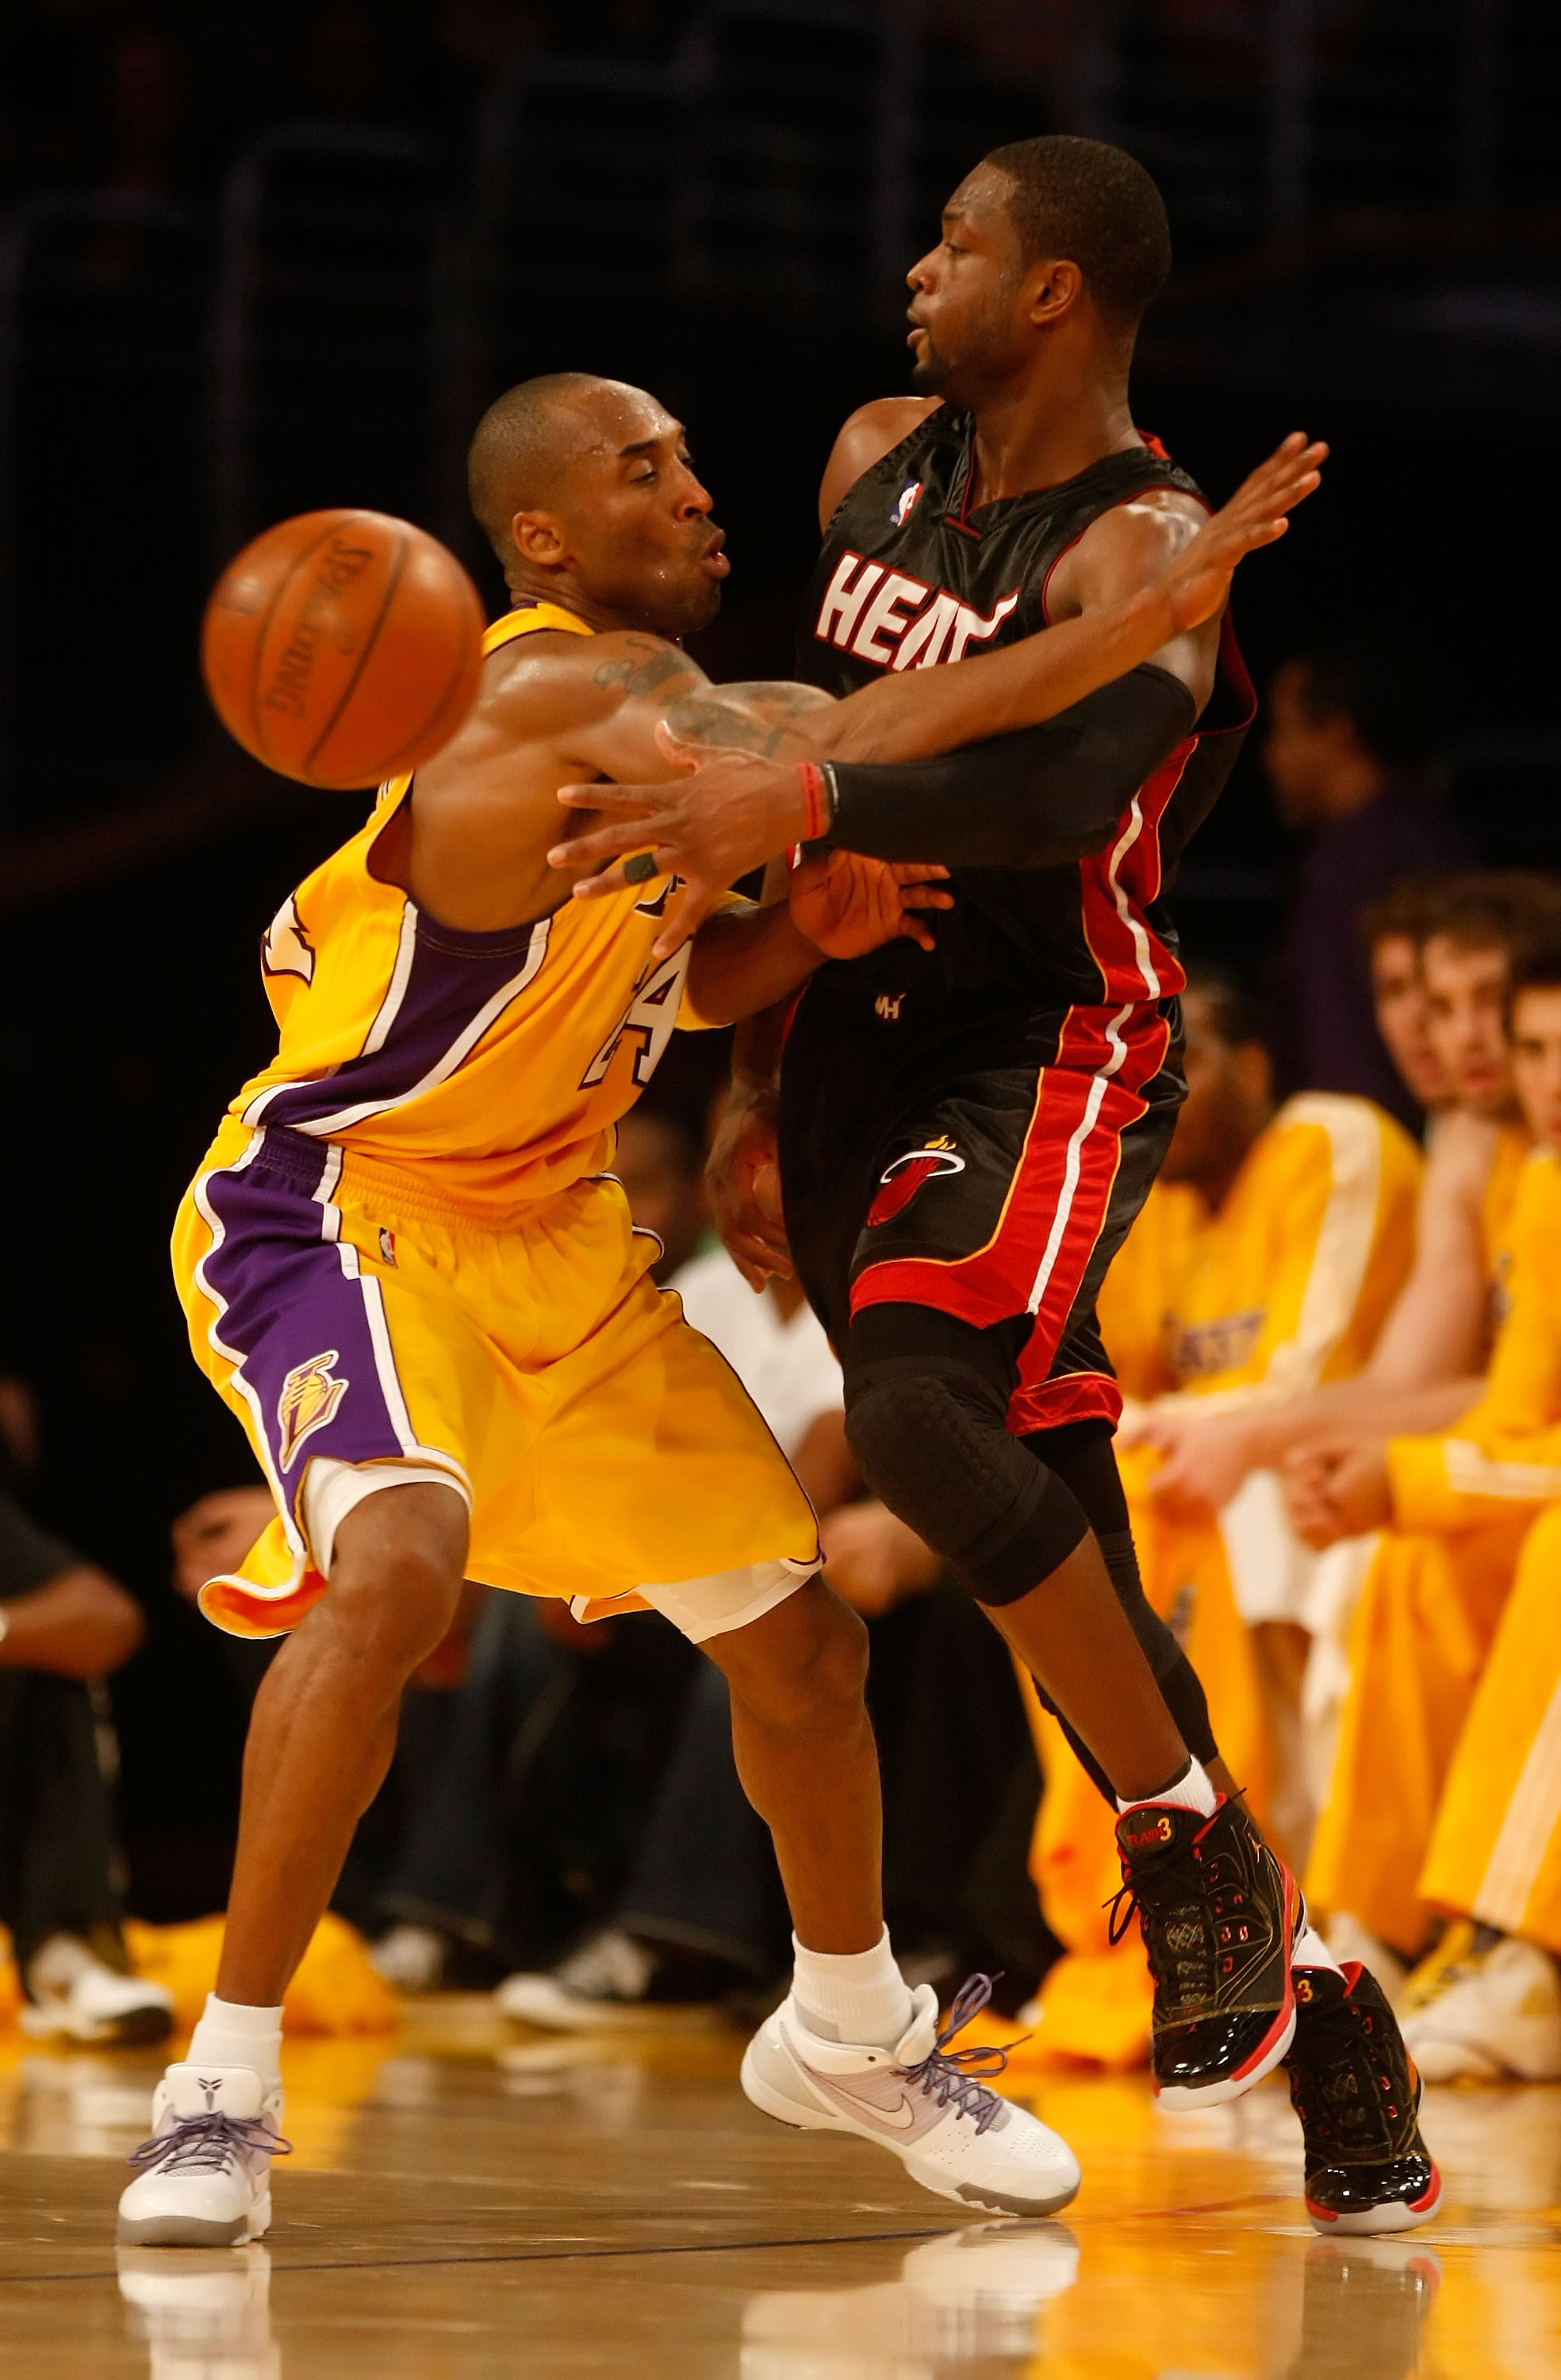 LOS ANGELES, CA - DECEMBER 04:  Dwayne Wade #3 of the Miami Heat passes the ball while being defended by Kobe Bryant #24 of the Los Angeles Lakers in the second half at Staples Center on December 4, 2009 in Los Angeles, California. The Lakers defeated the